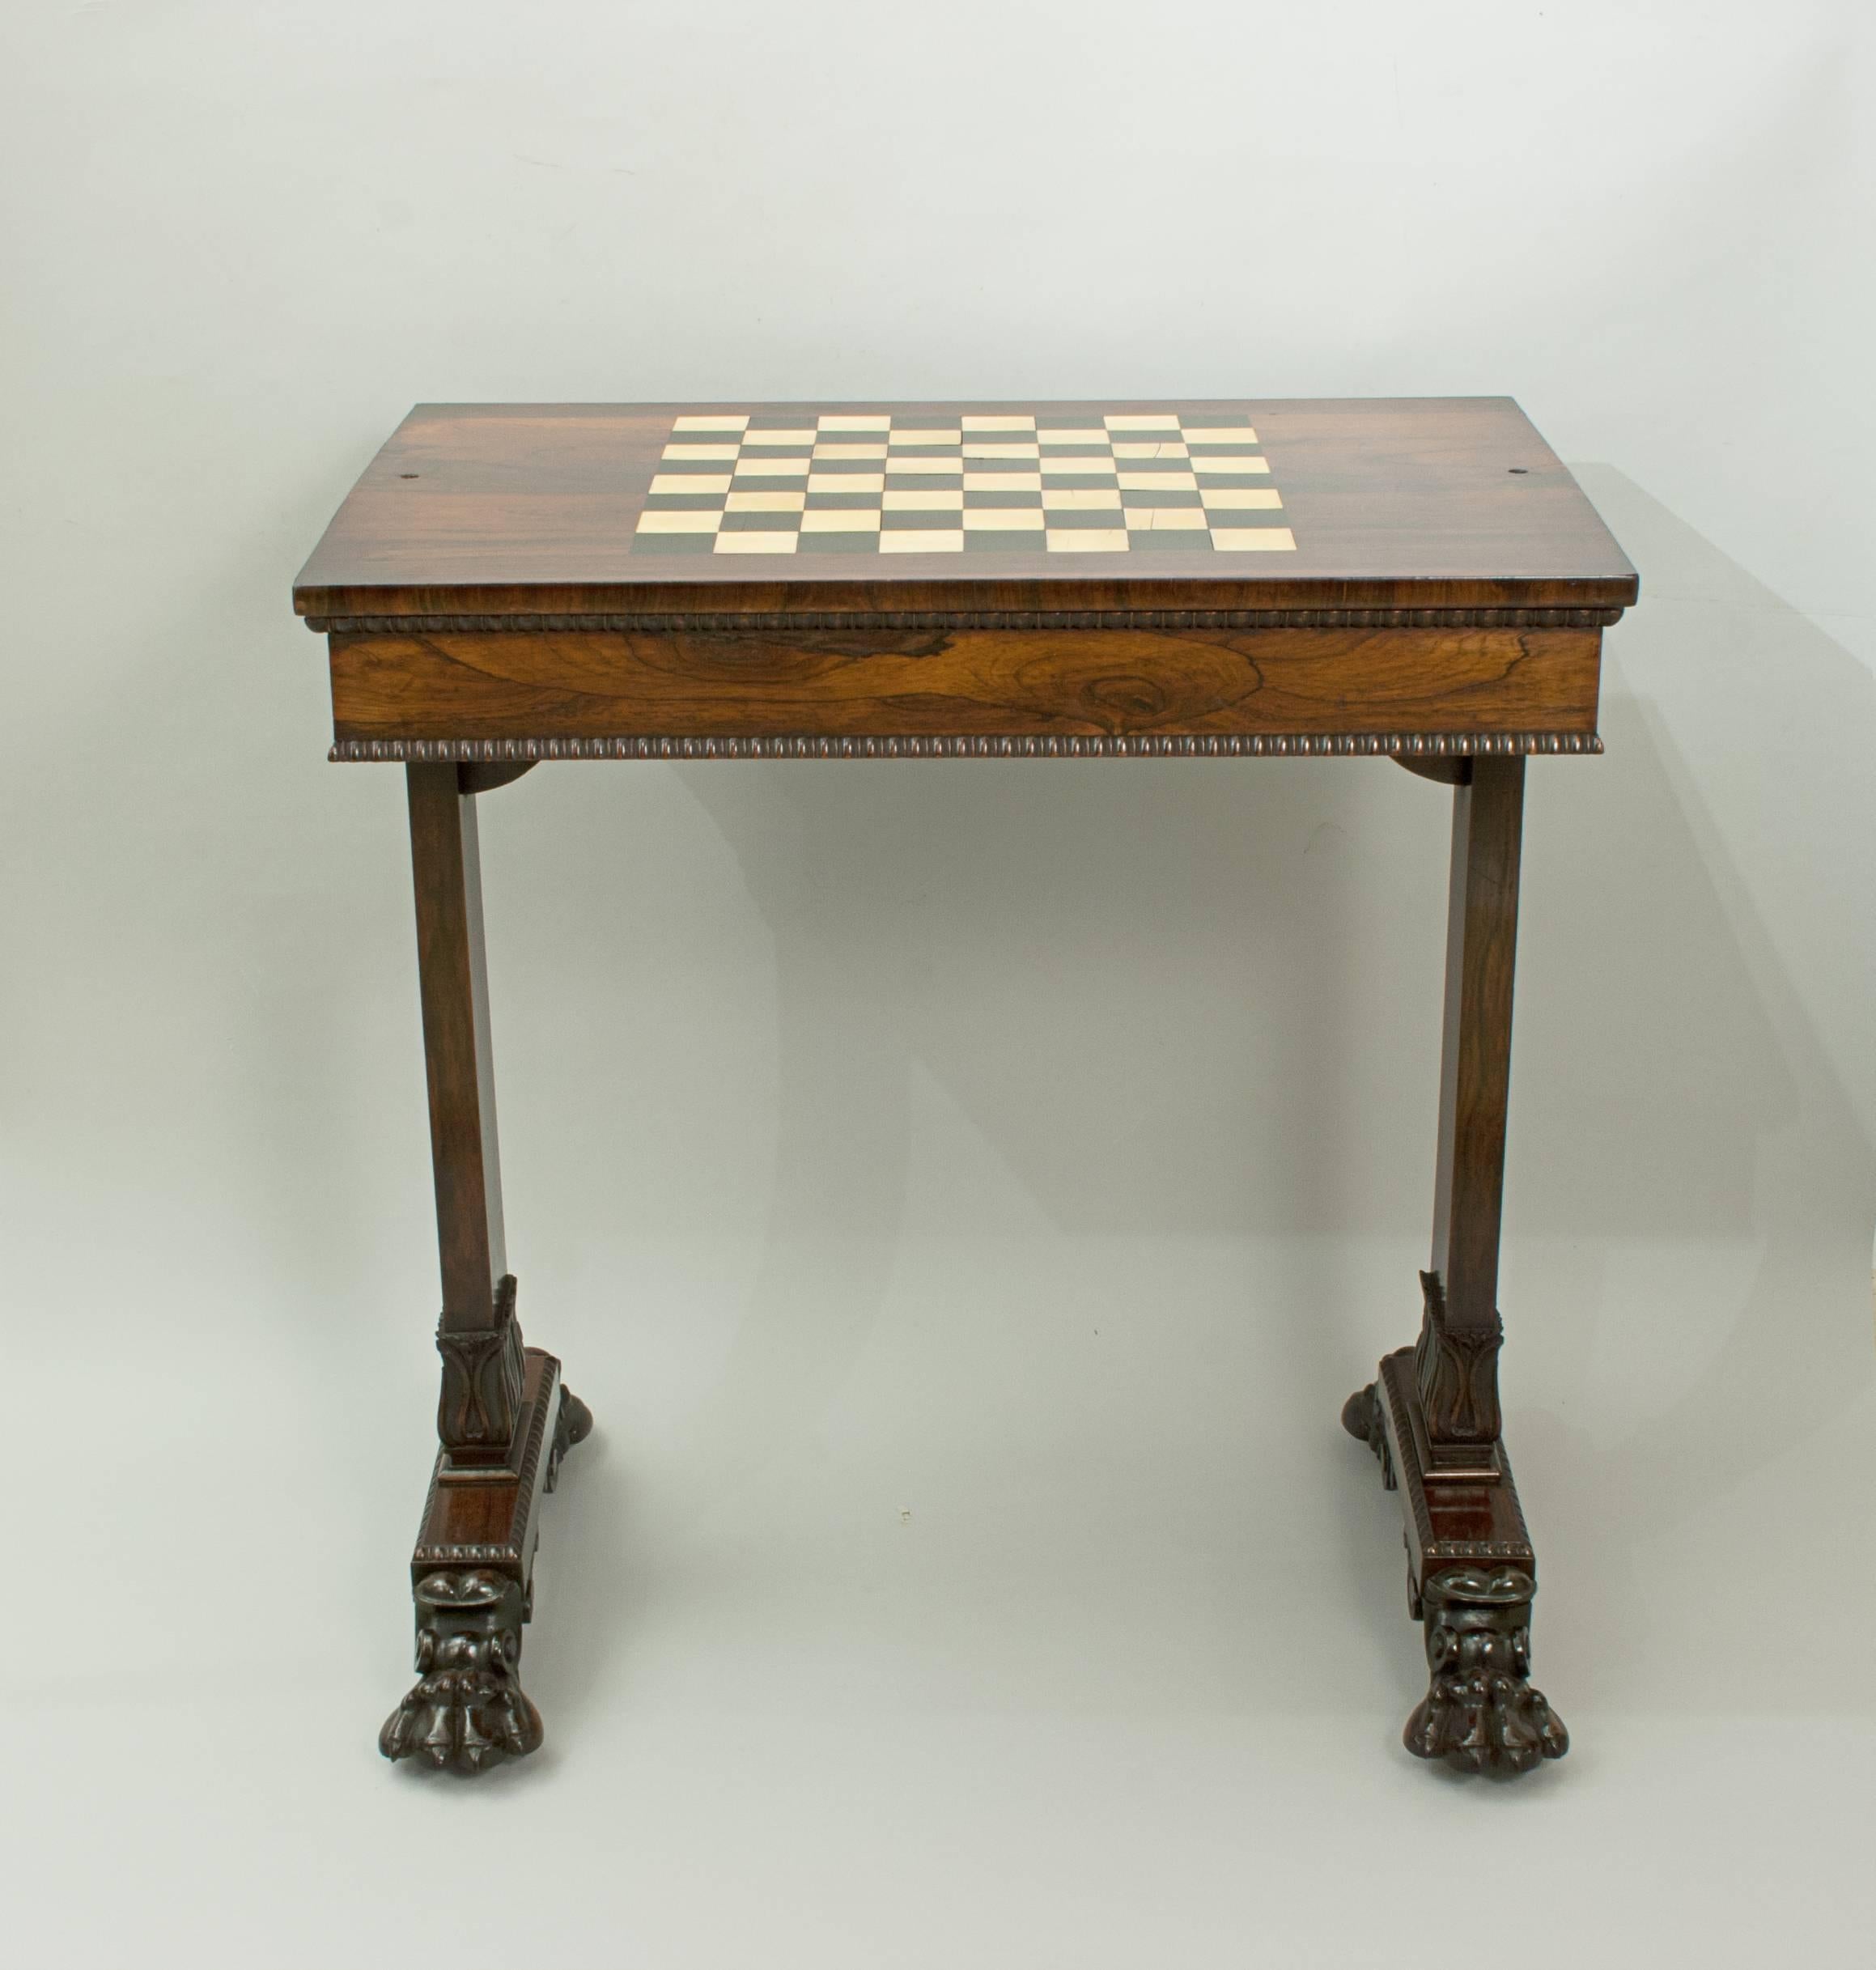 Regency Rosewood Games Table for Chess, Droughts and Backgammon